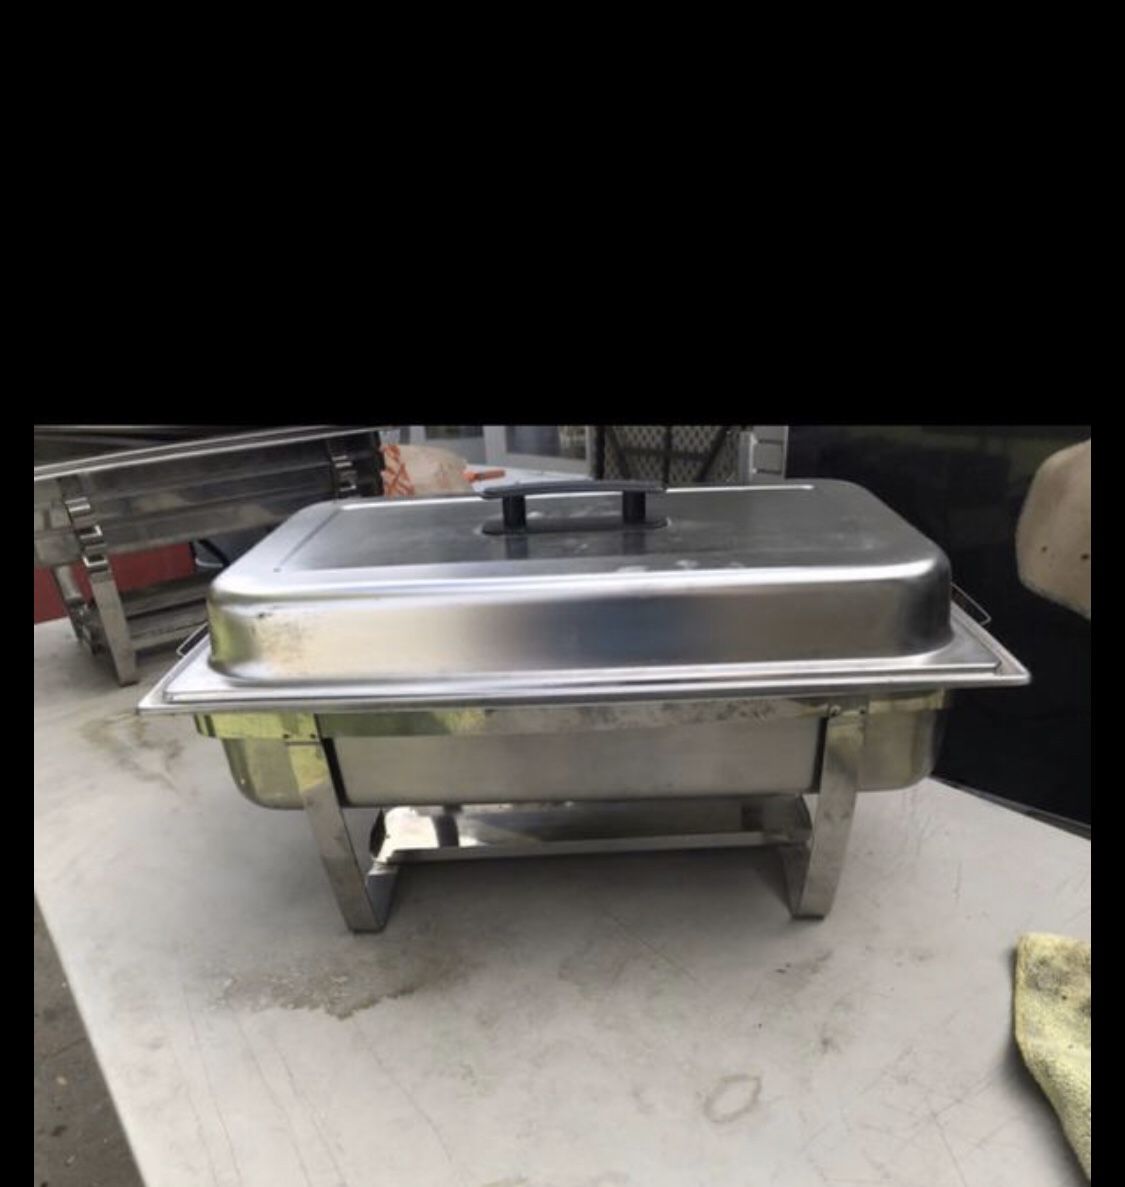 Chafing dishes or food workers $30 ranch total 4 ir $100 for all( 4)